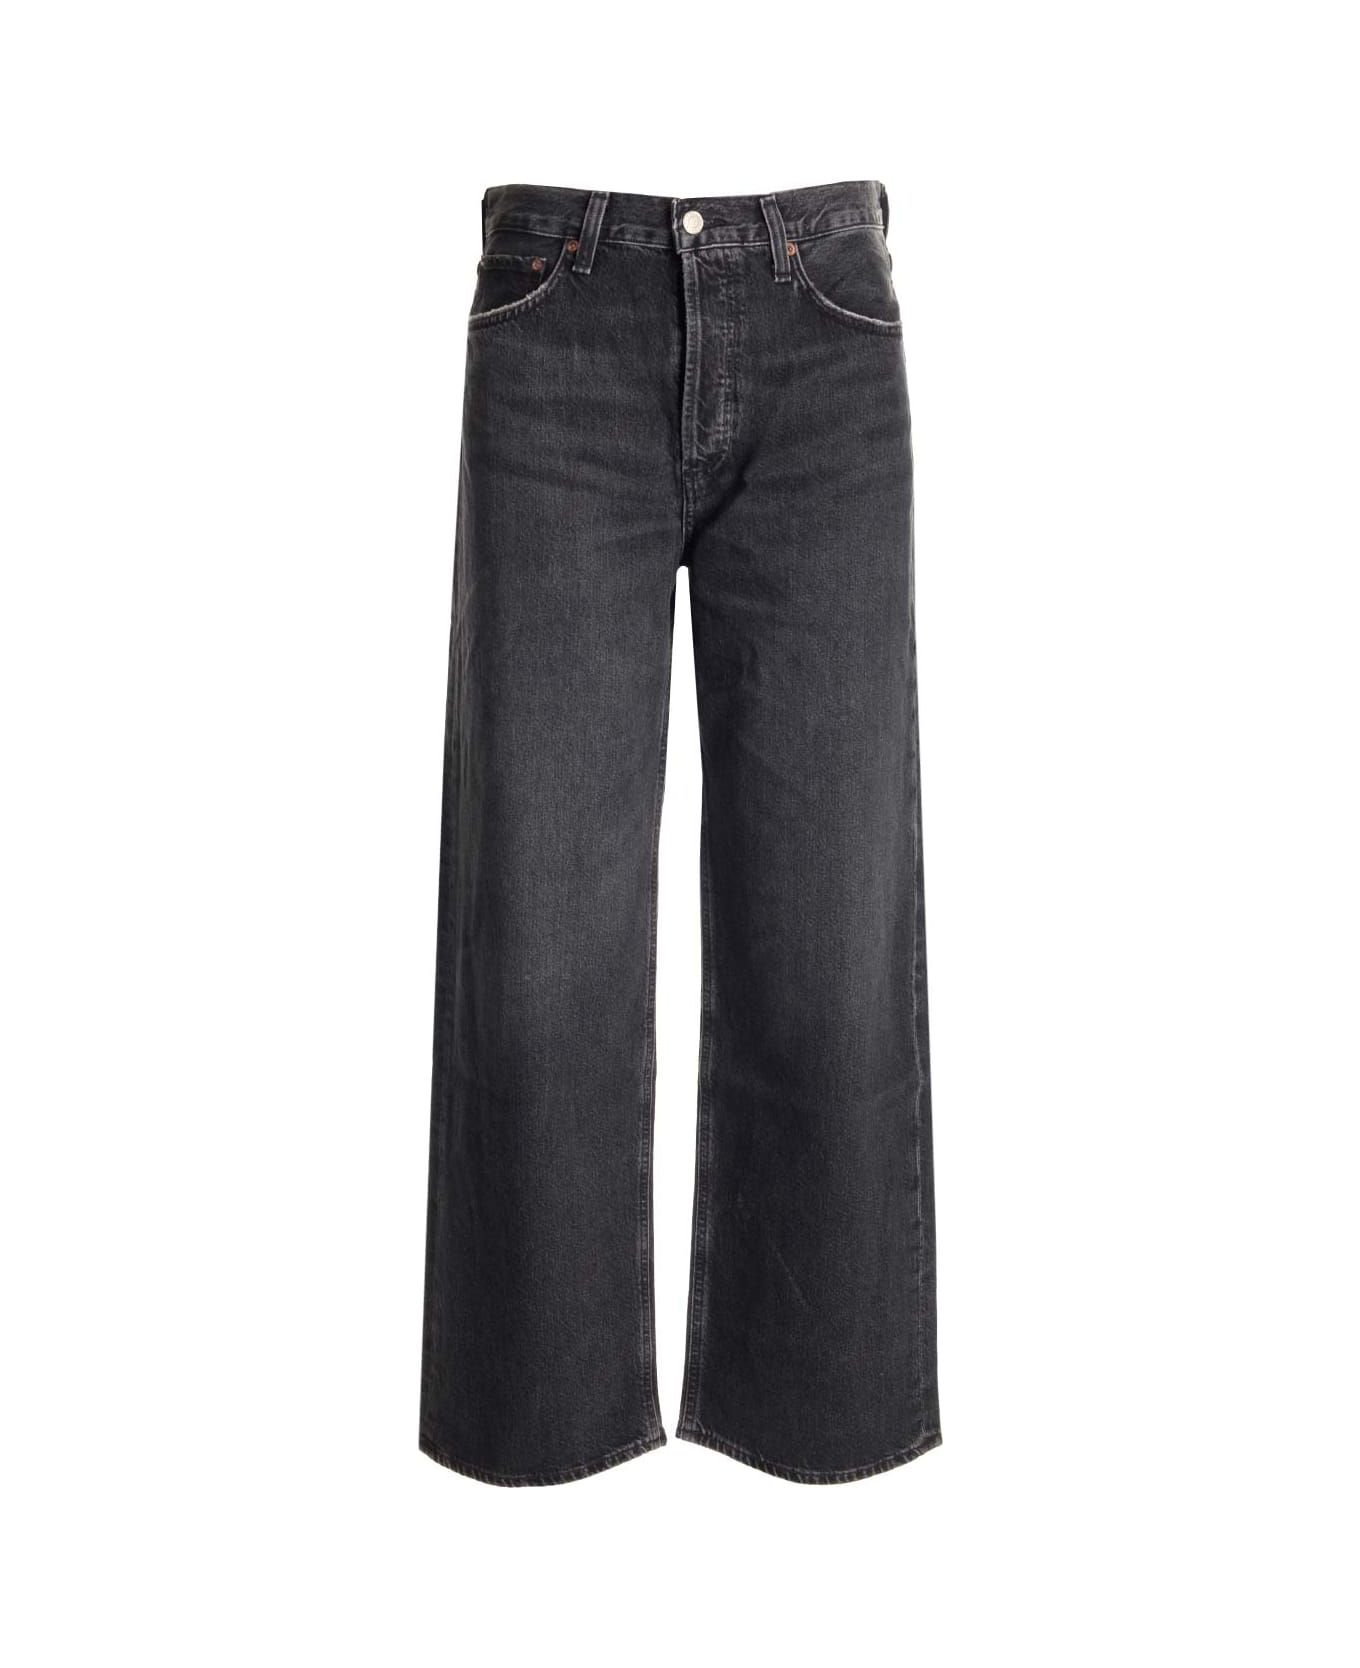 AGOLDE Faded Black Baggy Jeans - Parax Paradox